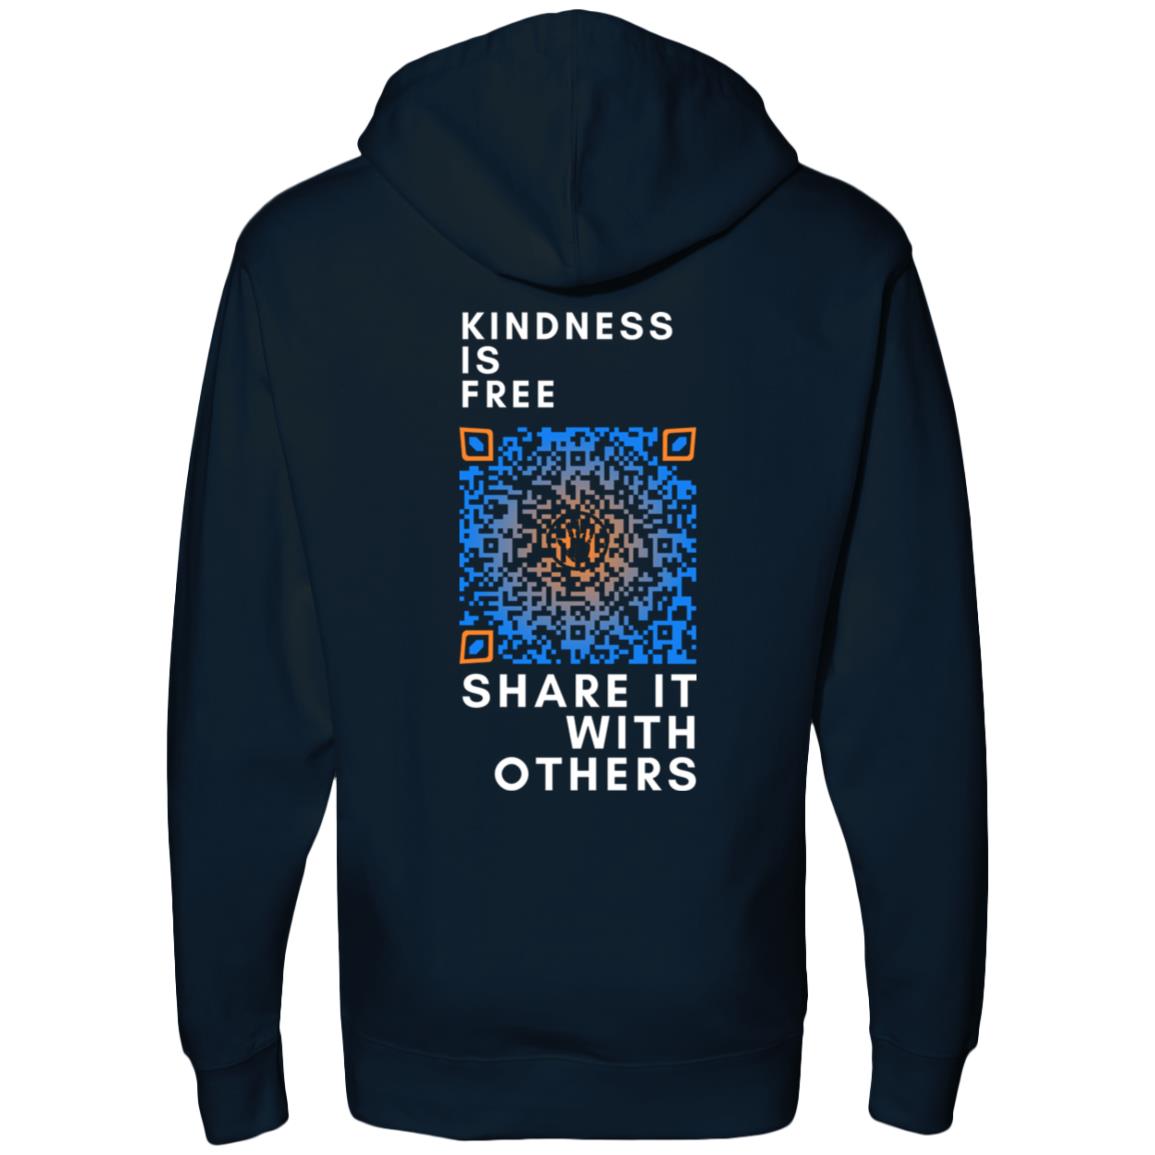 Share the Kindness - HopeLinks QrClothes